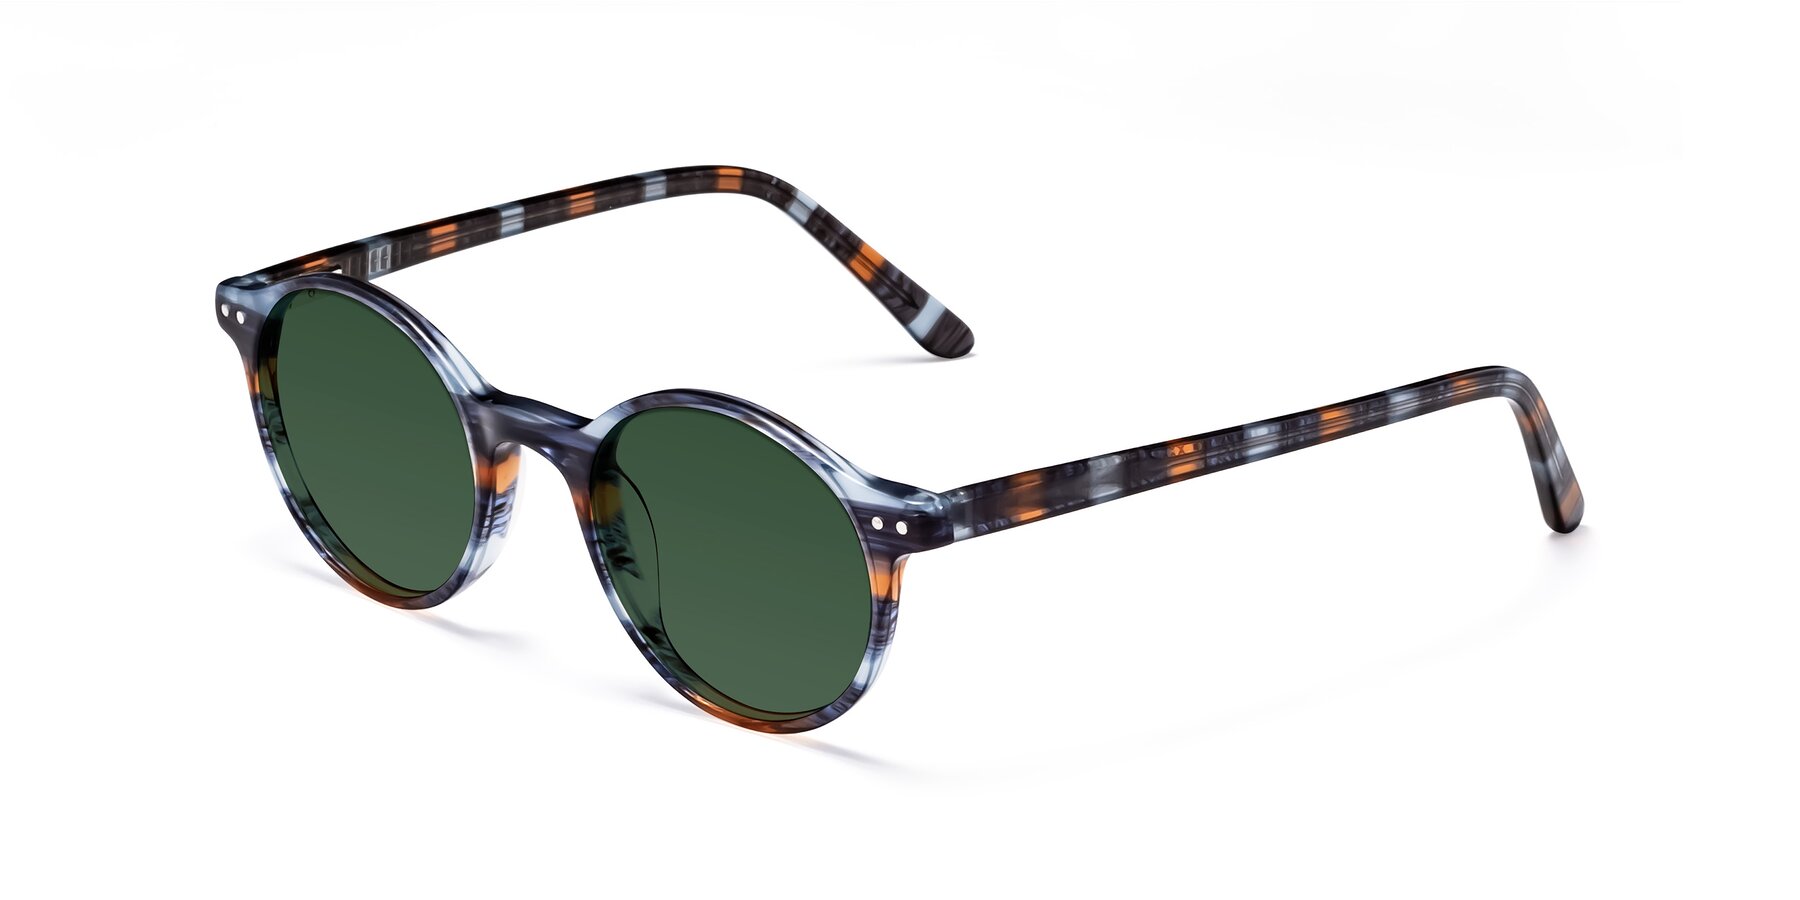 Angle of Jardi in Stripe Blue Brown with Green Tinted Lenses